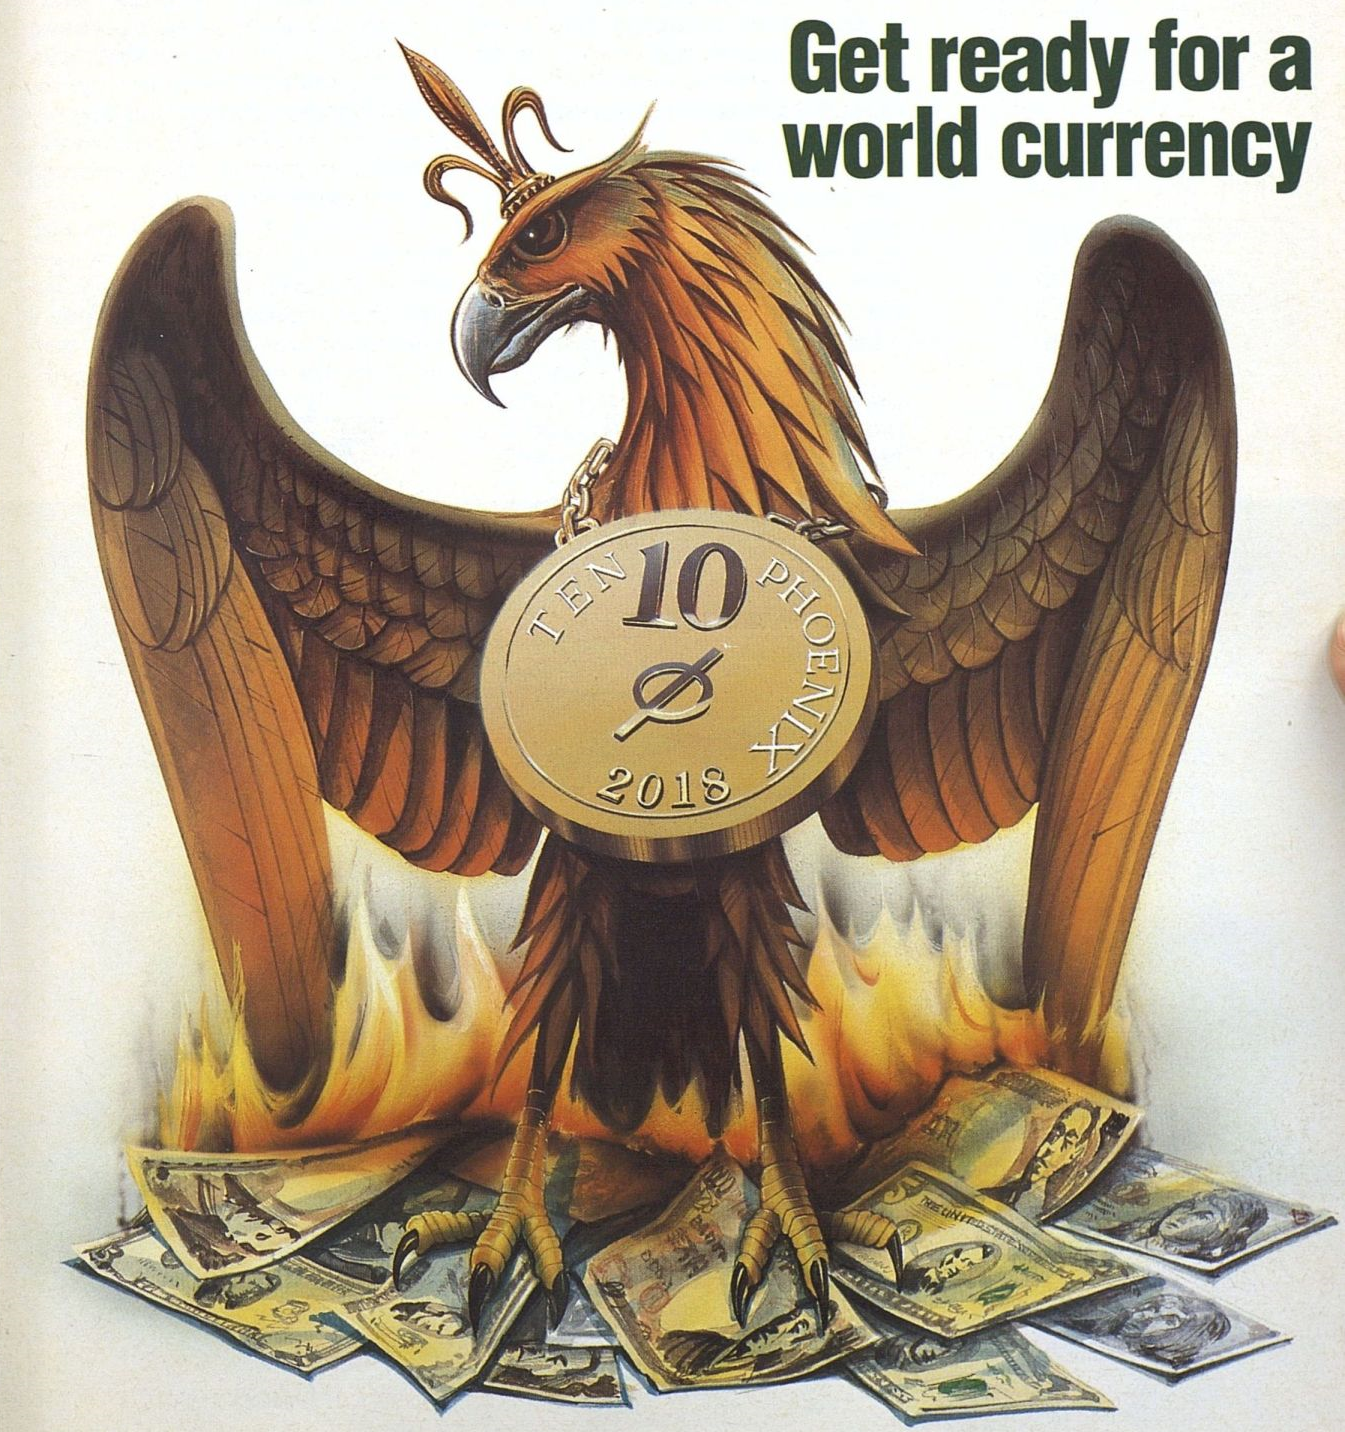 Get ready for a world currency